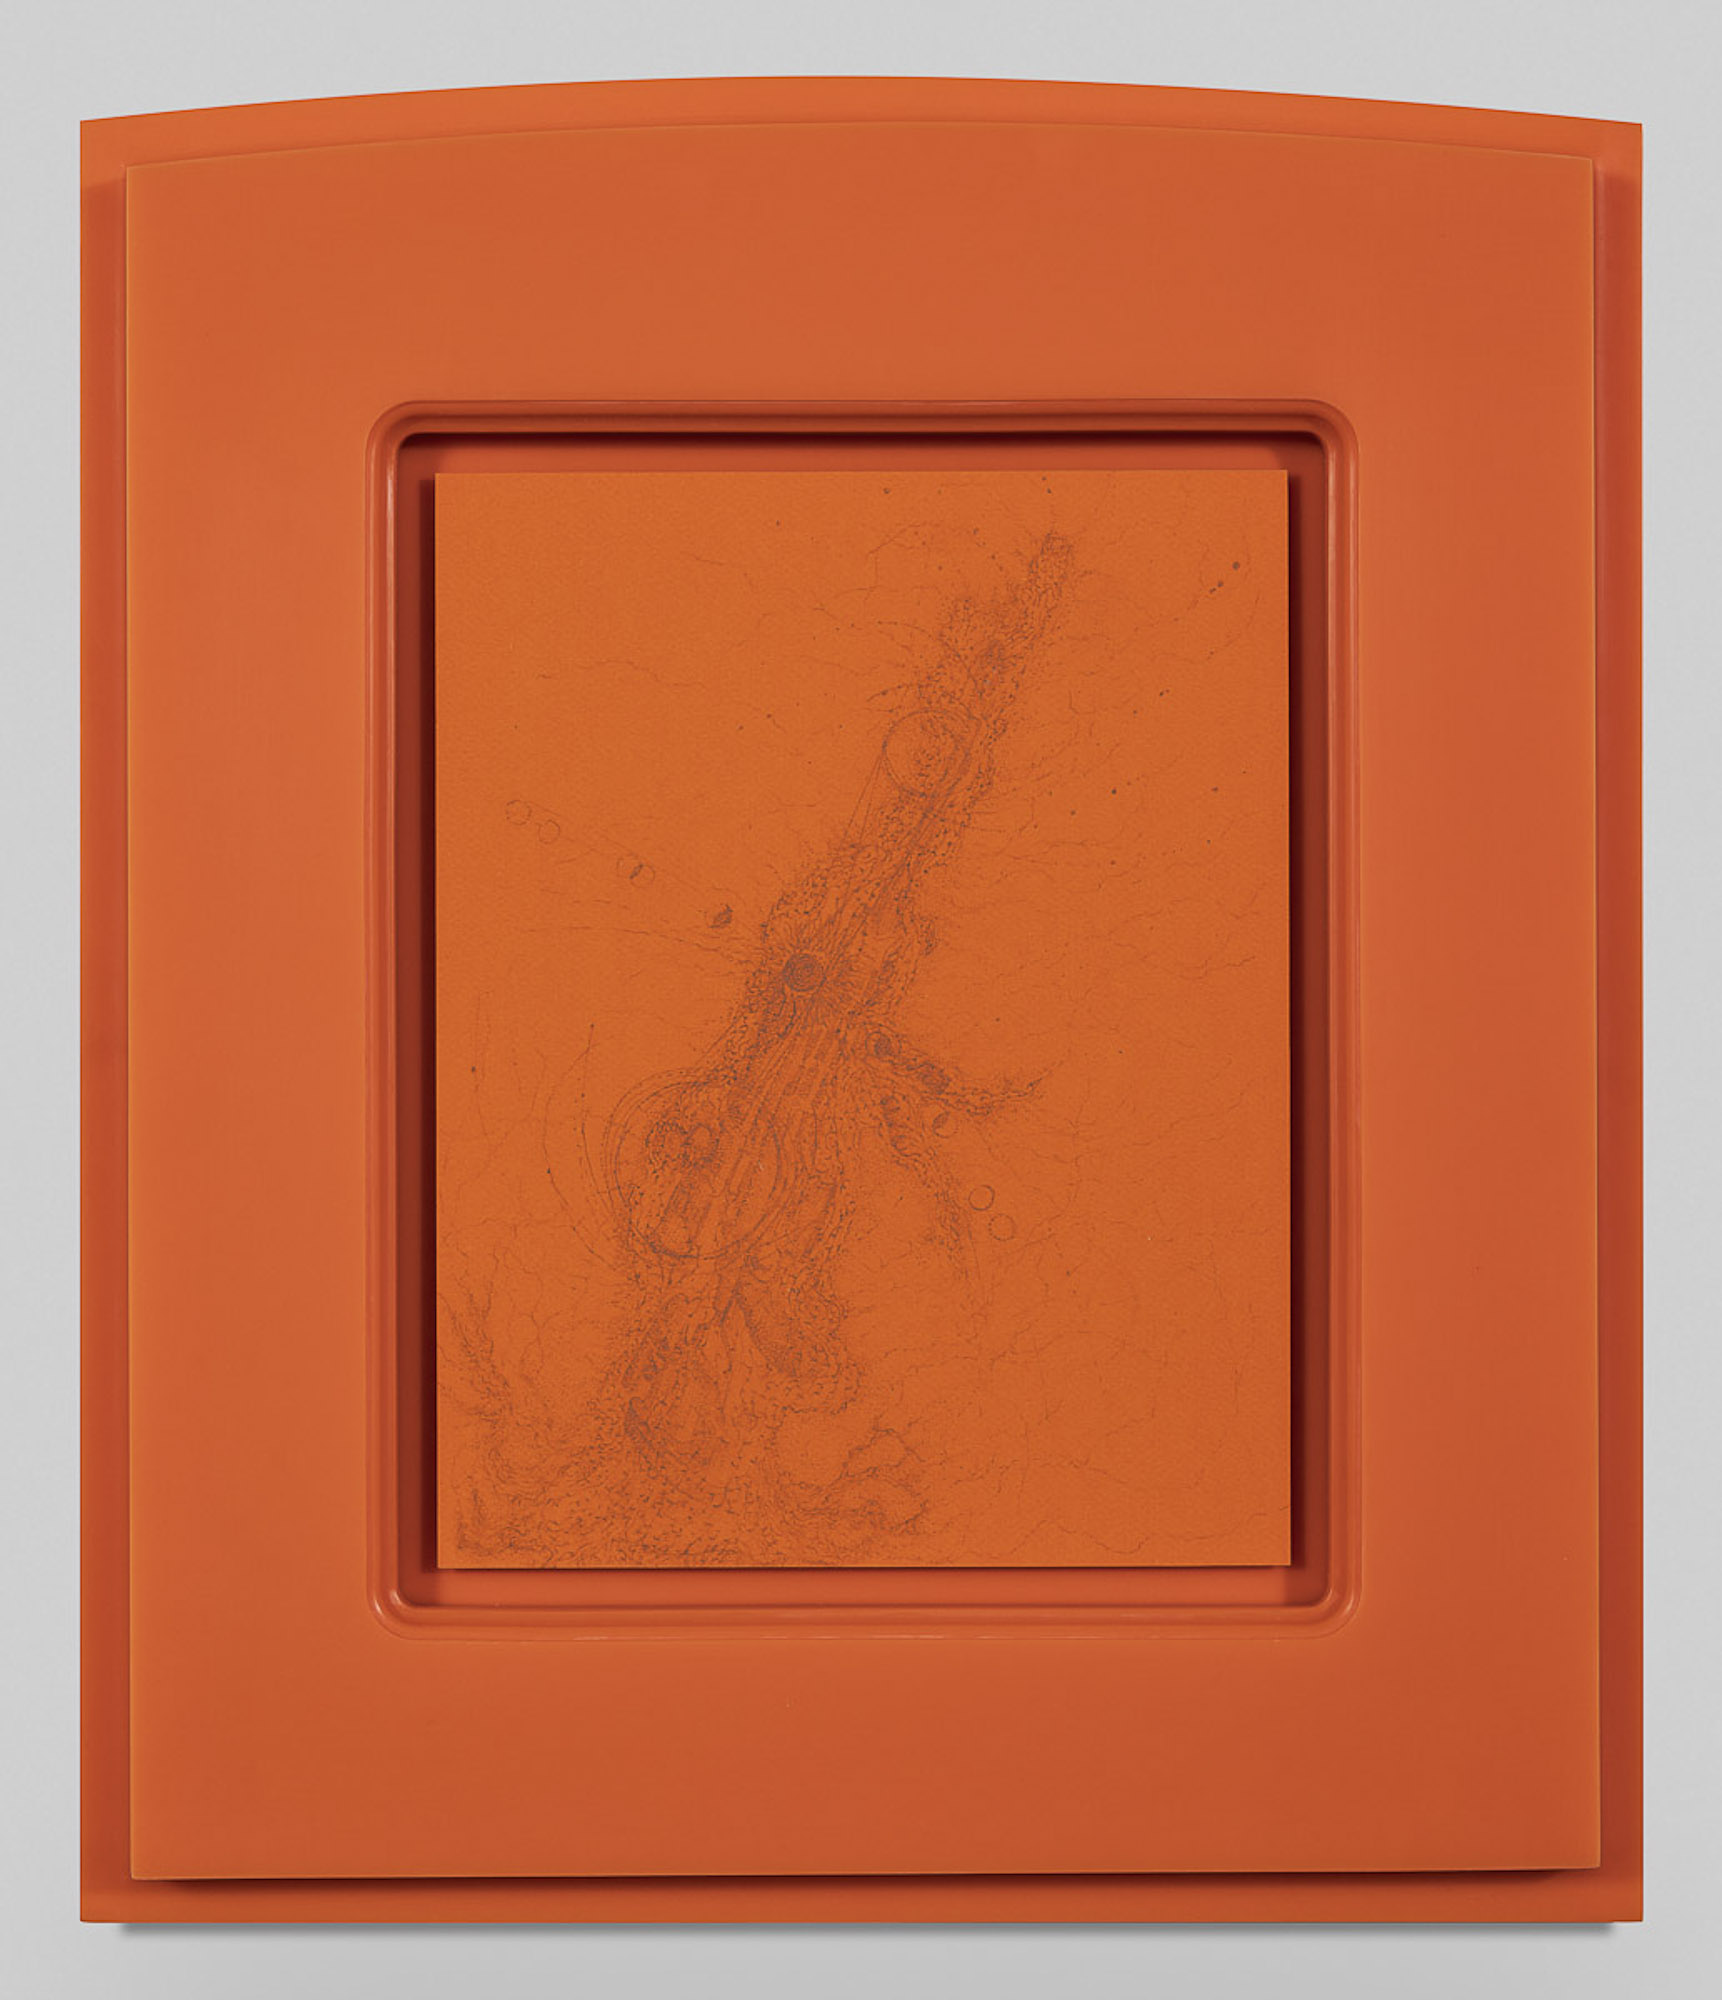 <i>Receiver</i>, 2019<br>Graphite on paper in ultra high molecular weight plastic frame<br>21 1/8 x 17 7/8 x 1 3/8 inches (53.7 x 45.4 x 3.5 cm) framed